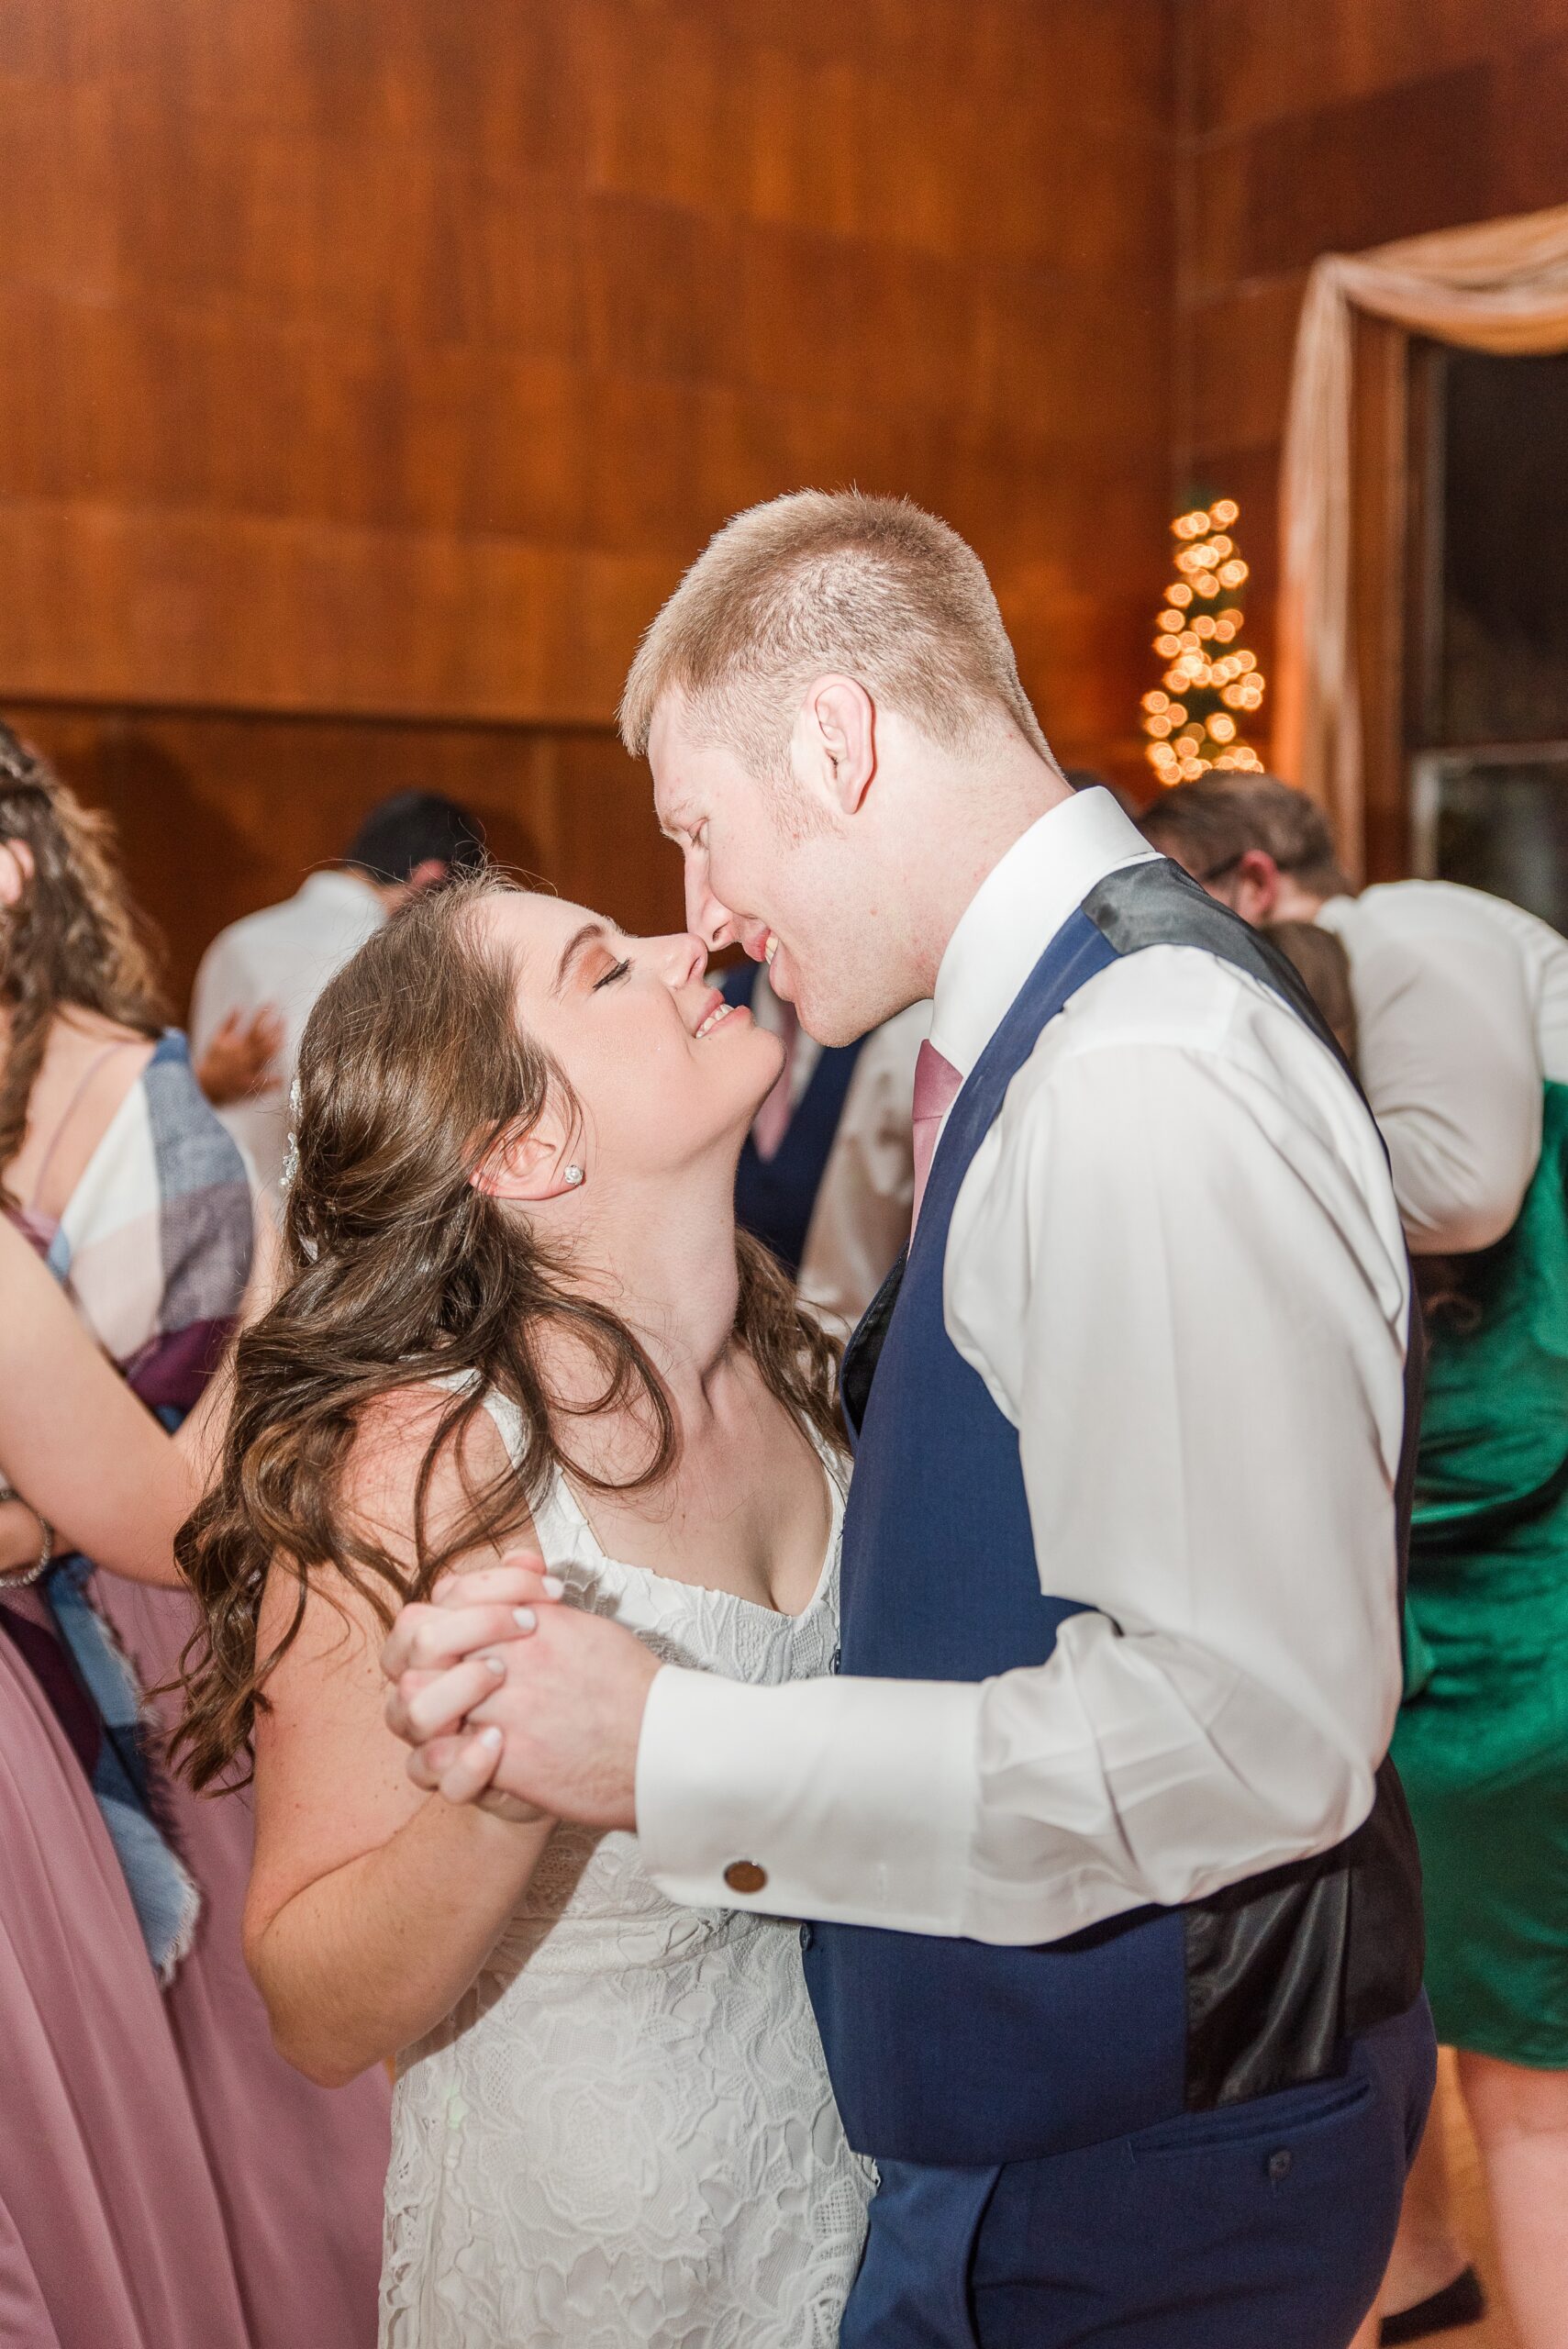 Newlyweds dance with their guests and lean in for a kiss